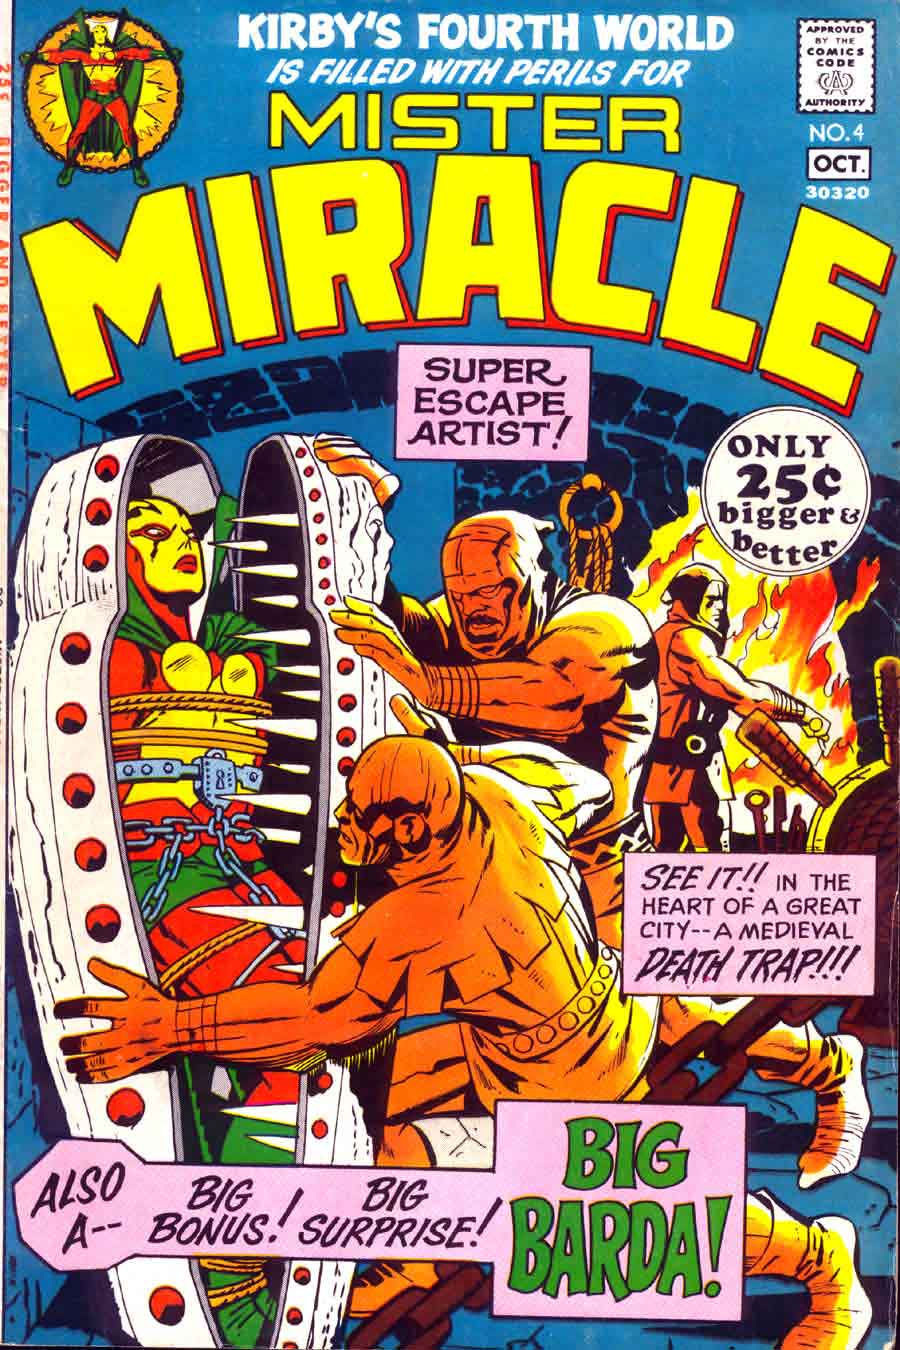 Mister Miracle v1 #4 dc 1970s bronze age comic book cover art by Jack Kirby